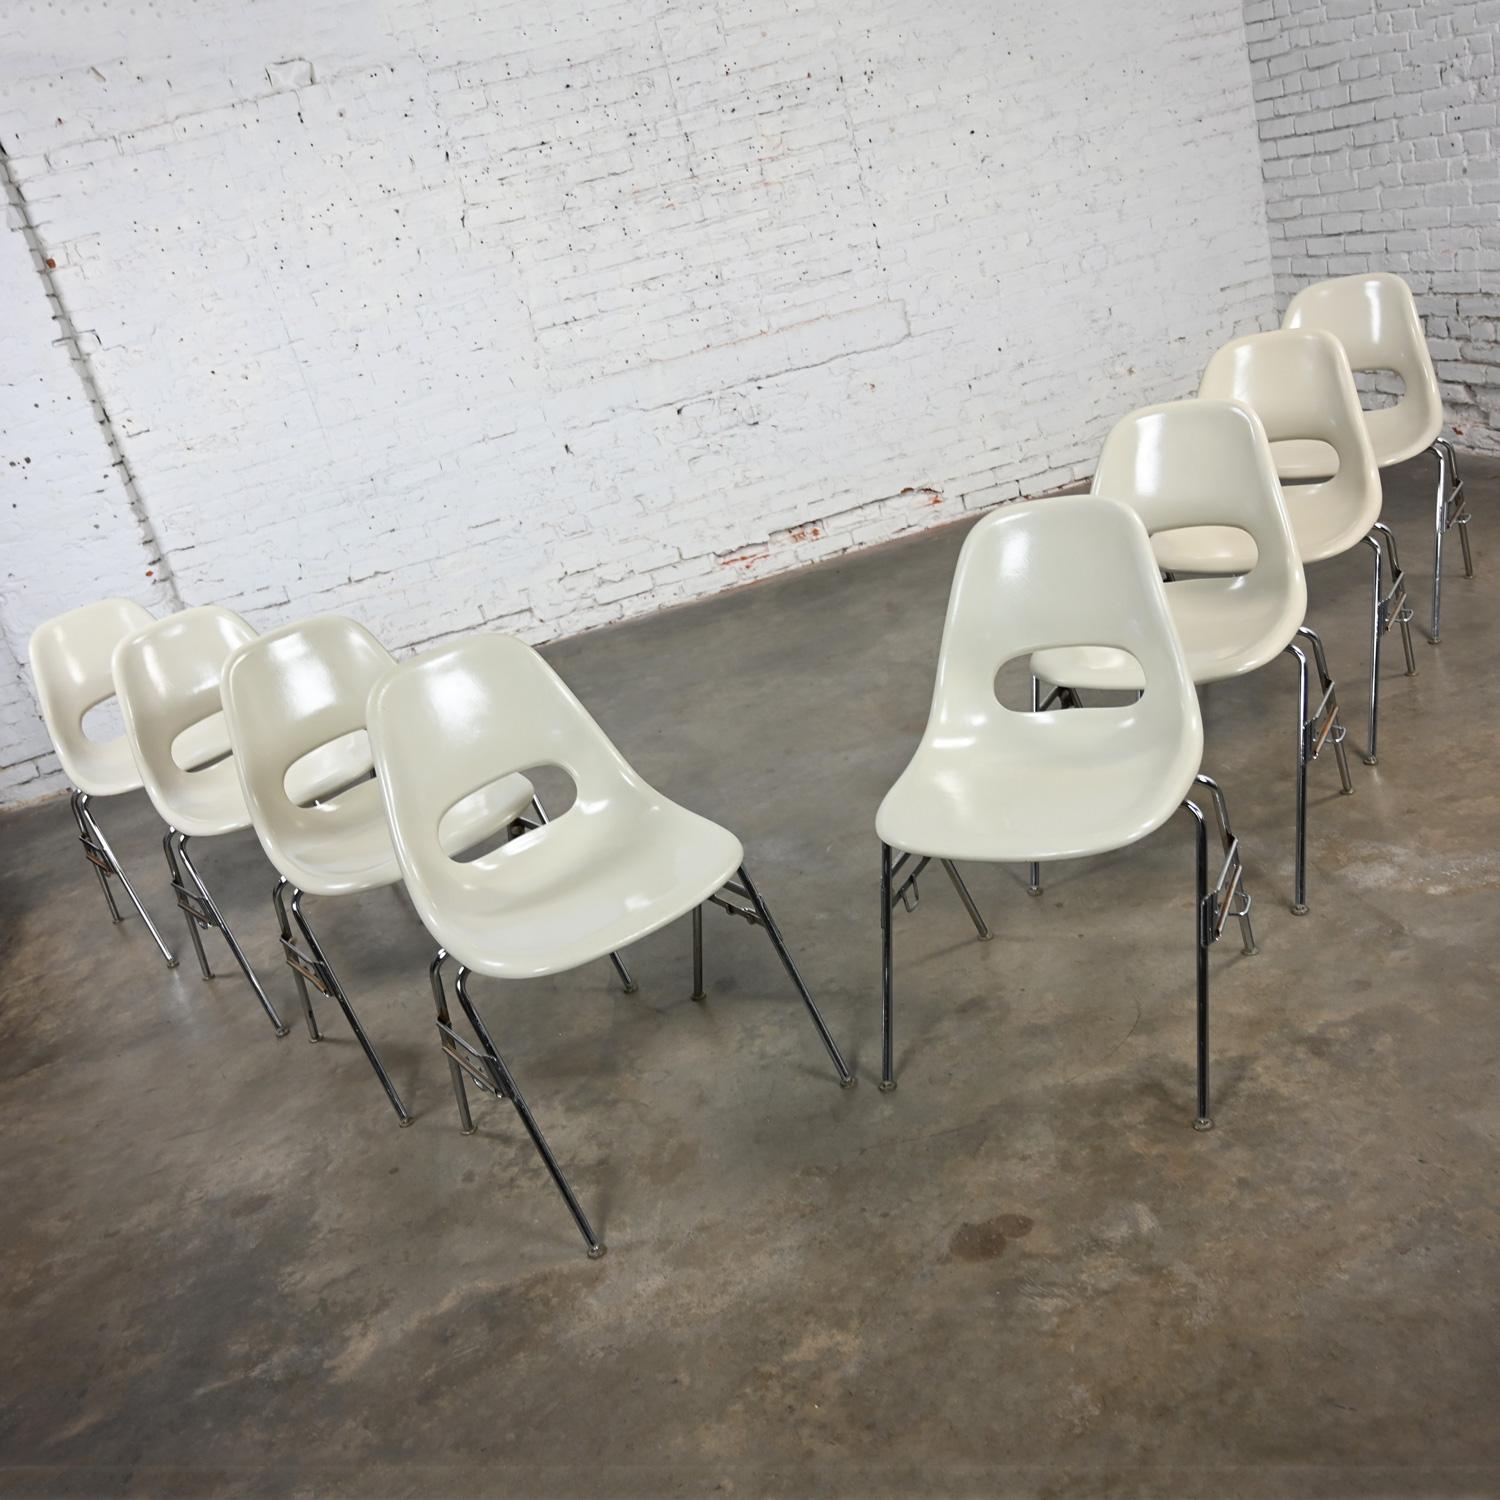 Handsome vintage Mid-Century Modern Krueger International white molded fiberglass shells & chrome tube base stacking chairs with side connecters, set of 8. Beautiful condition, keeping in mind that this is vintage and not new so will have signs of